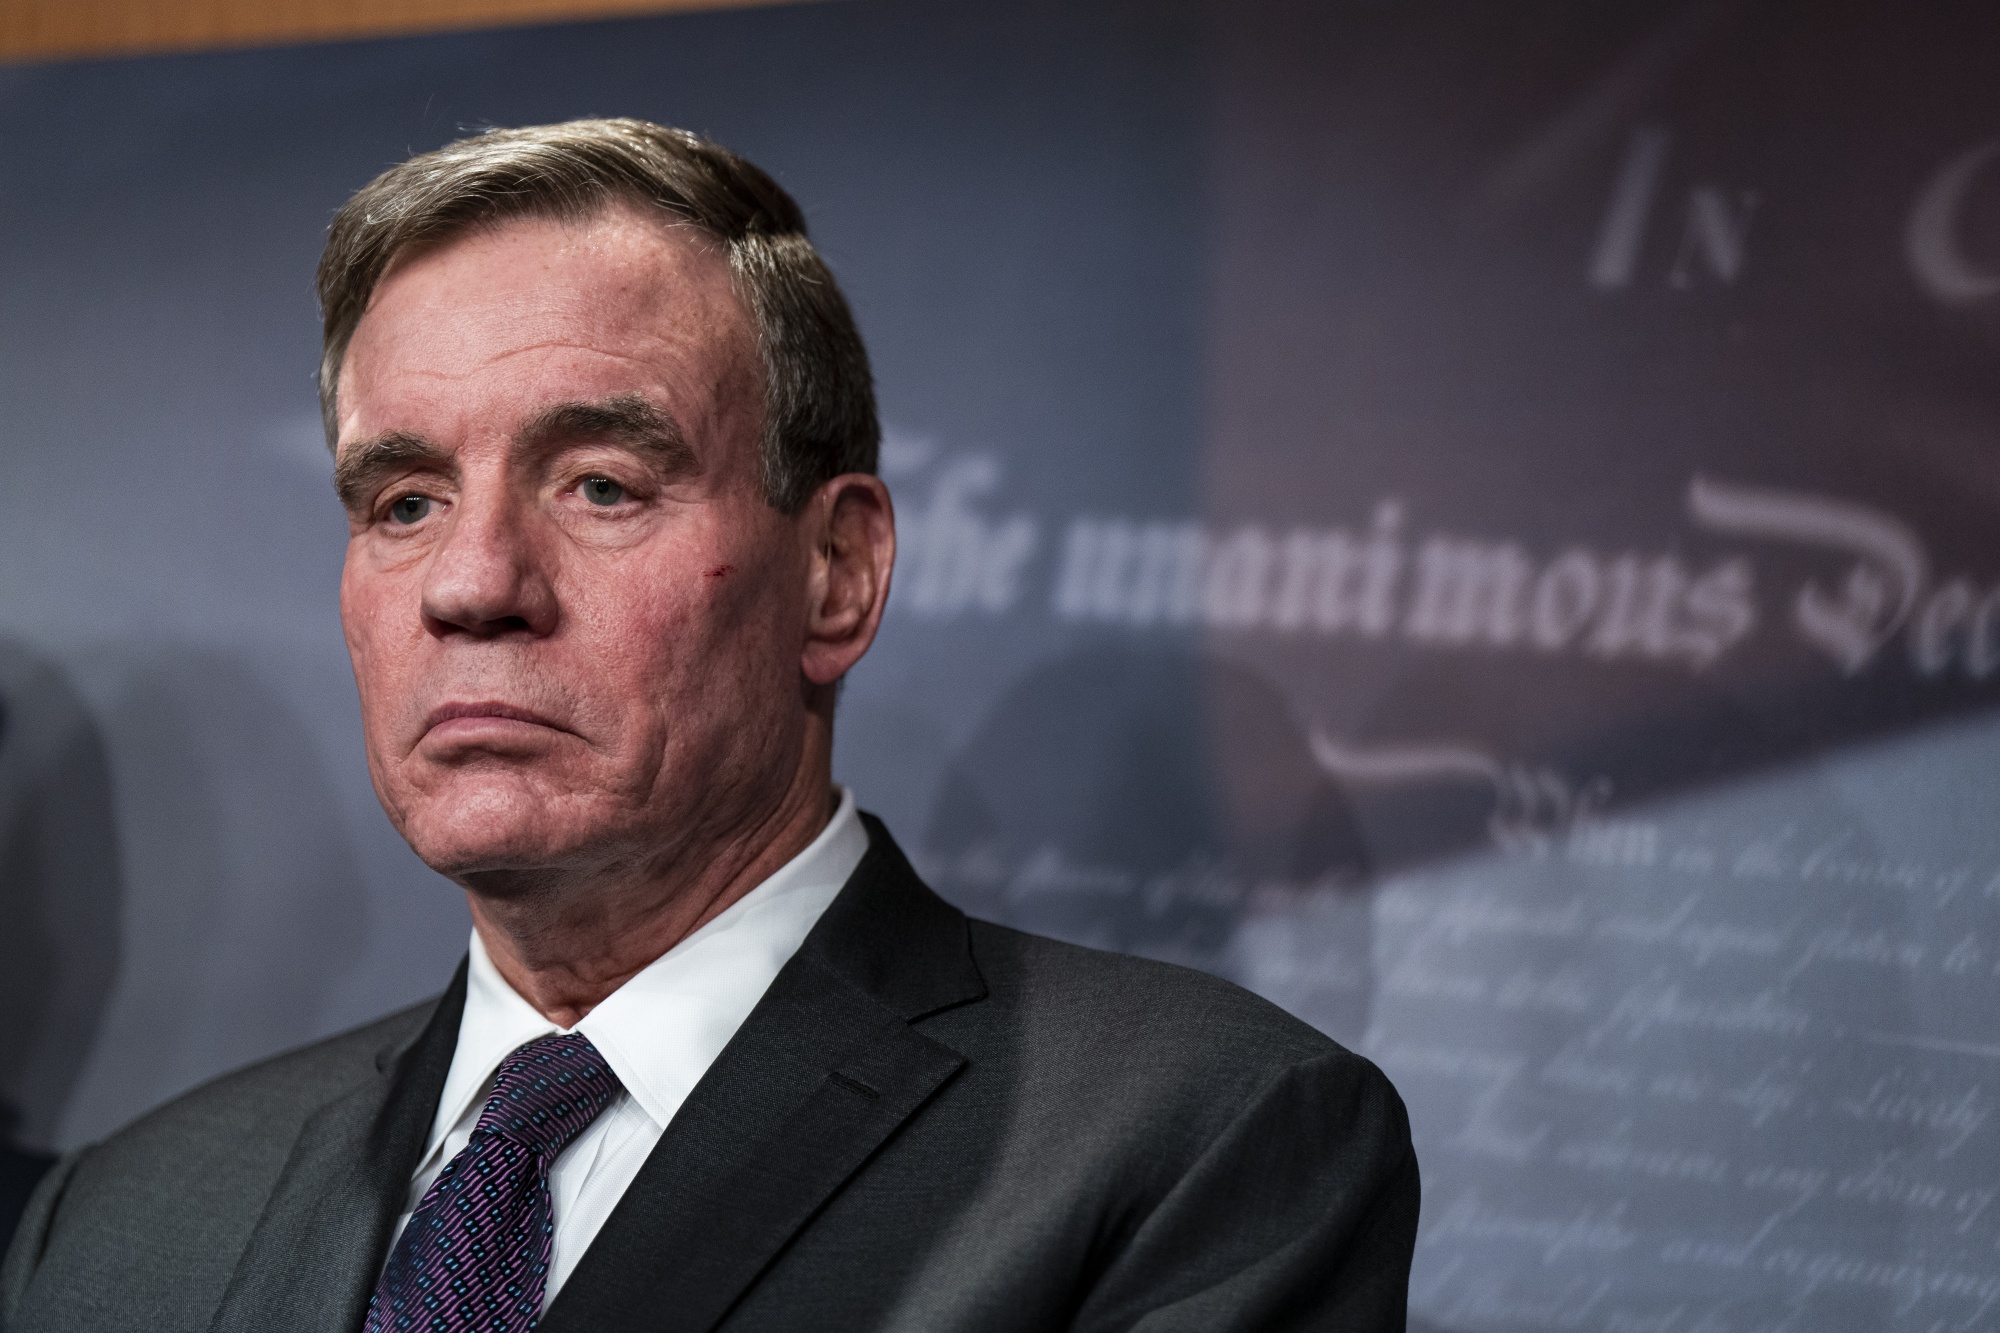 Senator Mark Warner, a Democrat from Virginia, during a news conference at the US Capitol in Washington, DC, US, on Tuesday, March 7, 2023. The White House is endorsing a new bill co-sponsored by a bipartisan group of Senators to deal with national security risks posed by TikTok and other foreign apps.